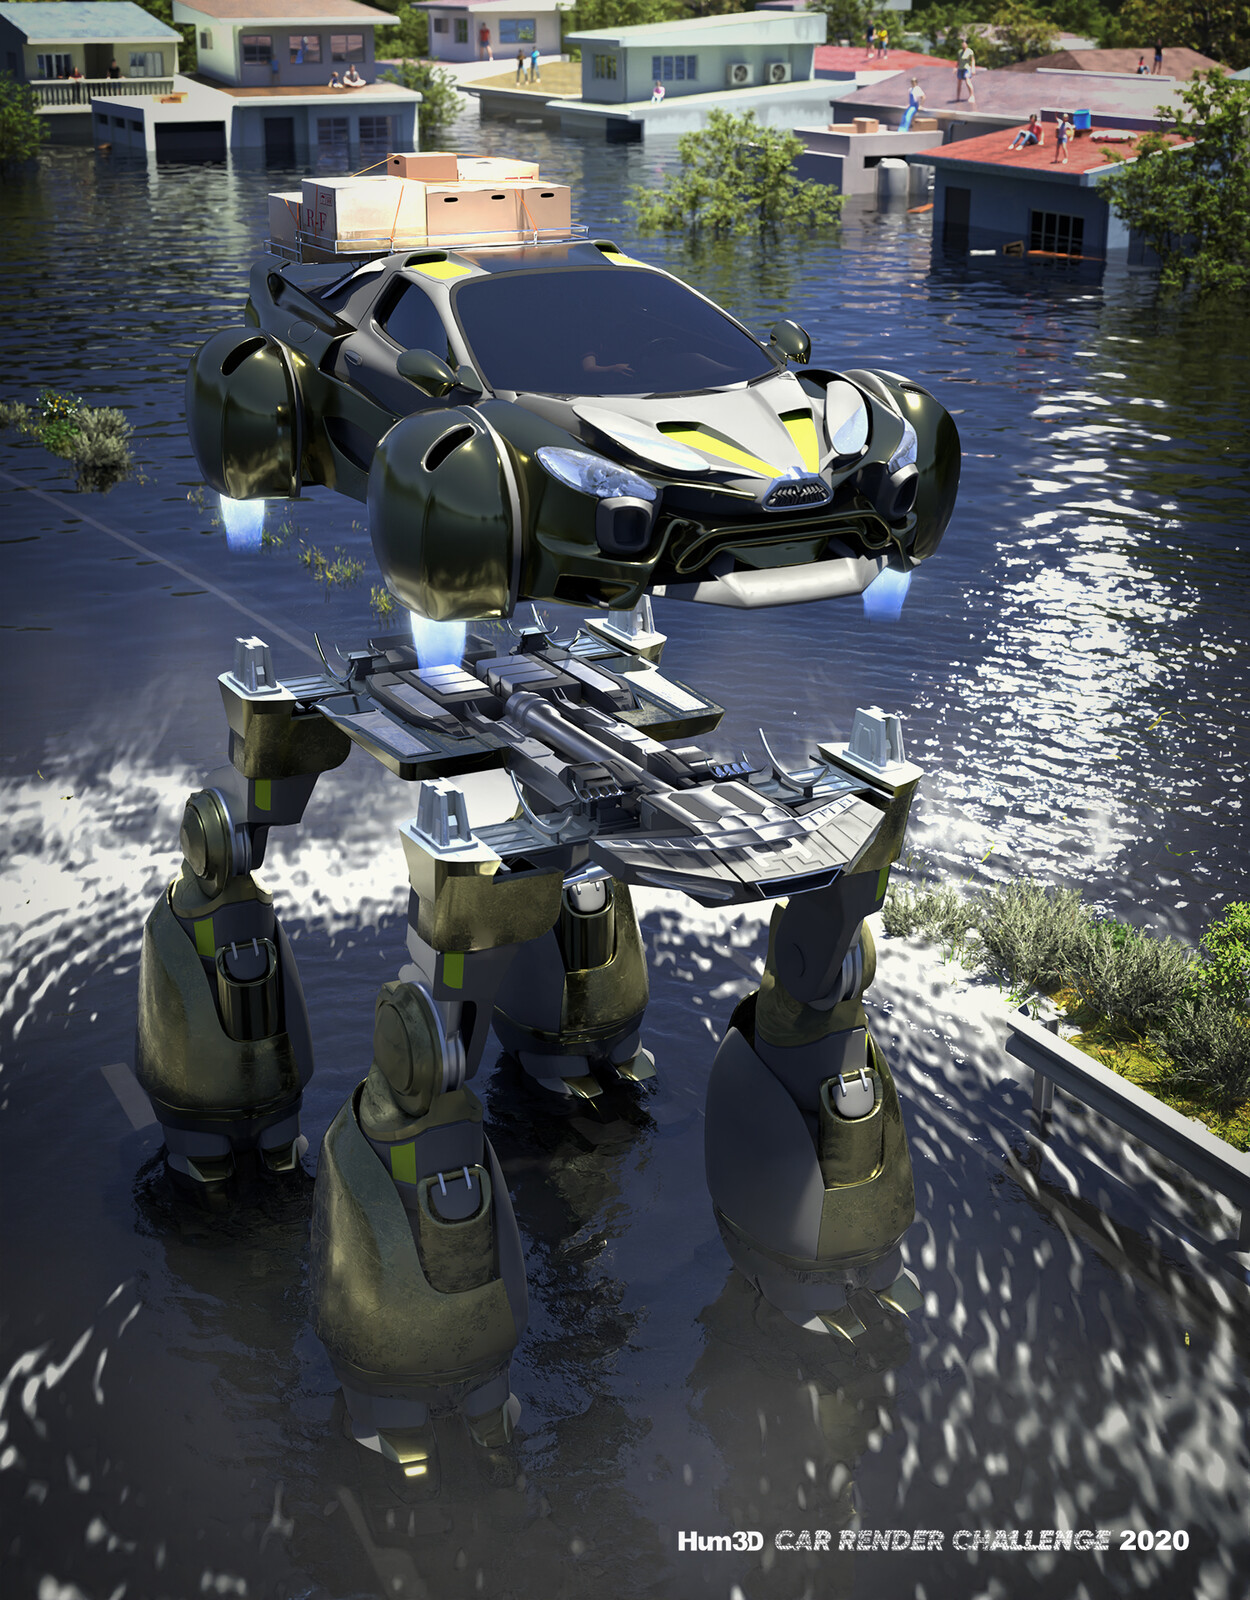 My finished entry for the Hum3D Car Render Challenge 2020. Flying car and Mech robot are all original concepts and designs. Used MakeHuman for the people and blenderkit for the other assets.

https://hum3d.com/challenges/3rd-phase/